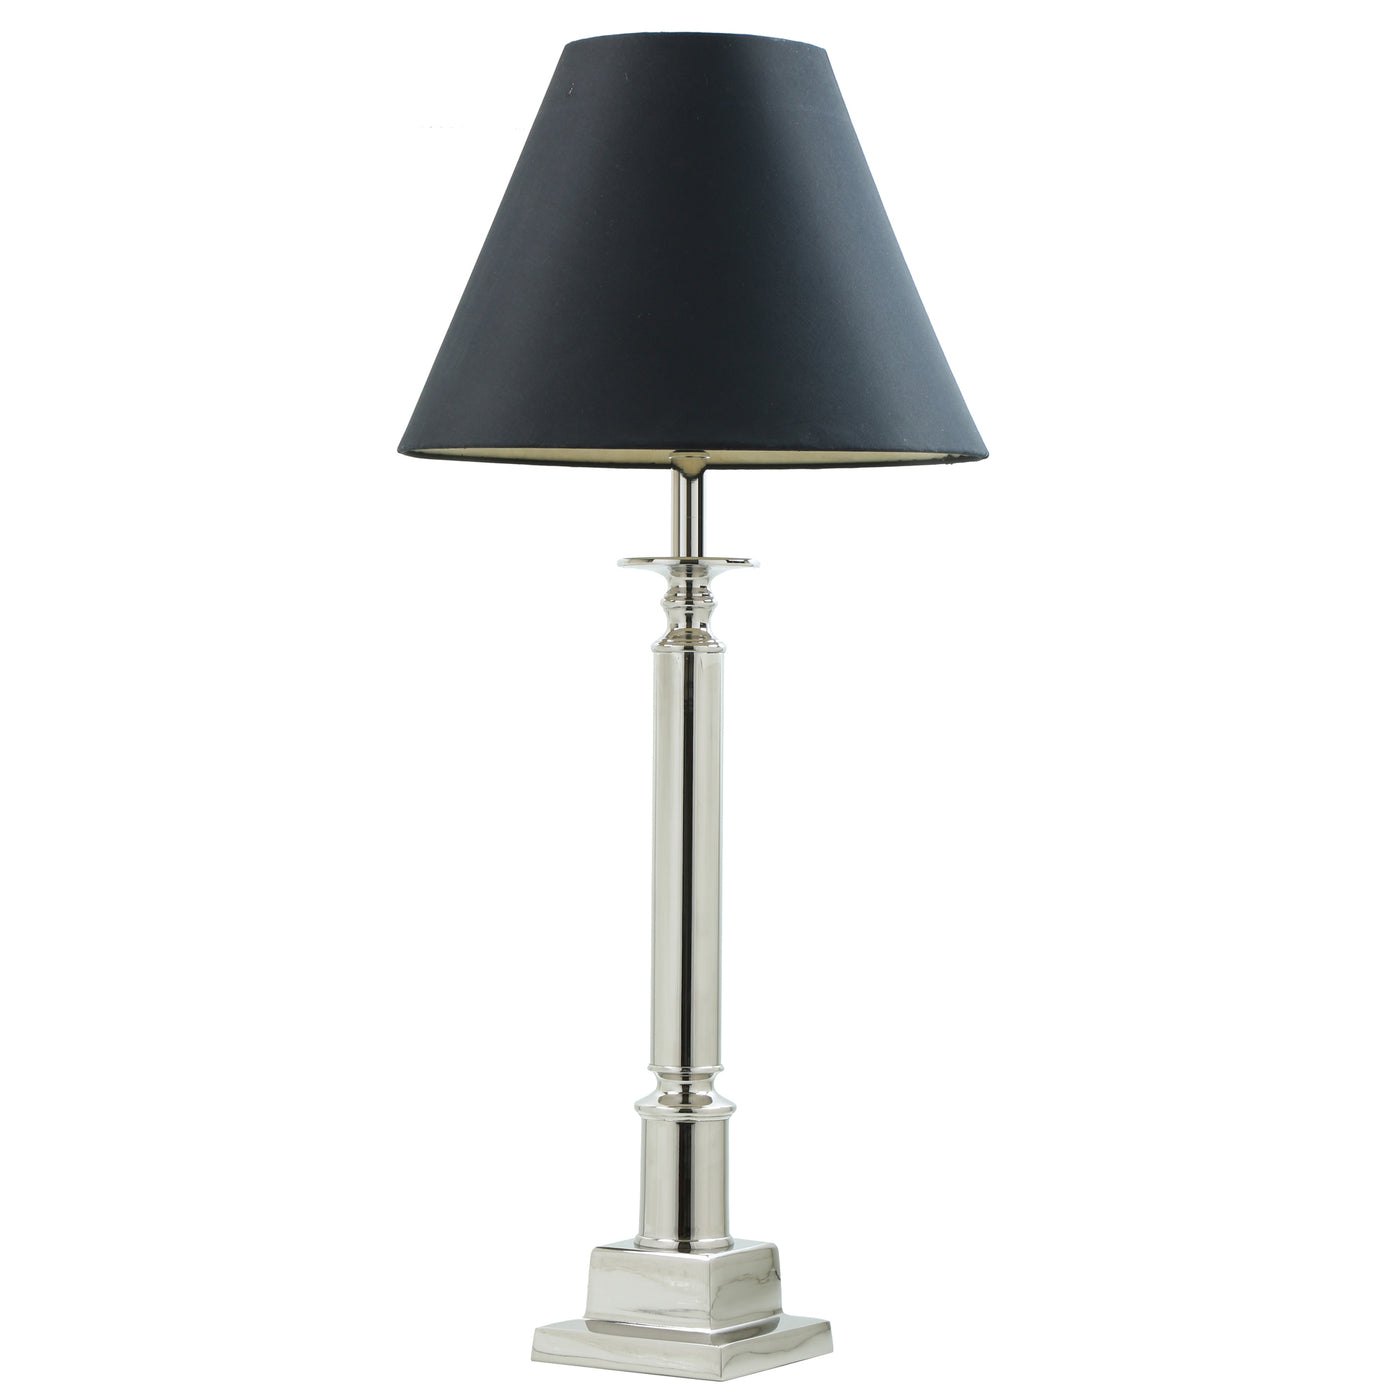 TABLE LAMP WITH BLACK SHADE 25"